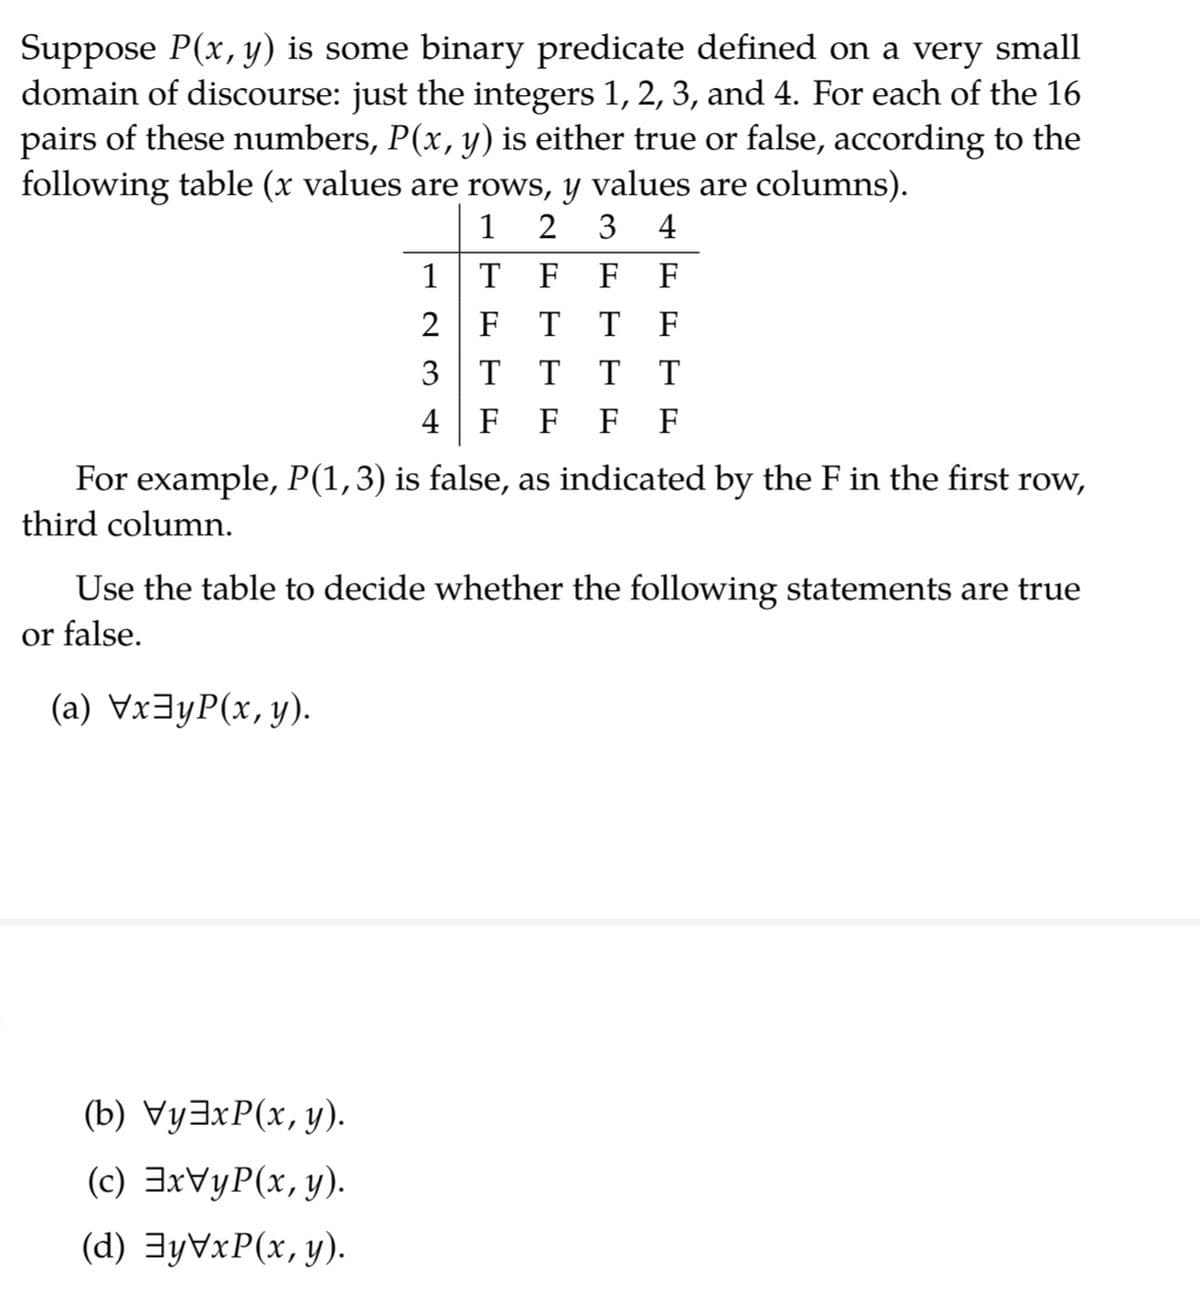 Suppose P(x, y) is some binary predicate defined on a very small
domain of discourse: just the integers 1, 2, 3, and 4. For each of the 16
pairs of these numbers, P(x, y) is either true or false, according to the
following table (x values are rows, y values are columns).
1
2
3
4
1
T
F
F
F
2
F
тт
F
3
T
T
T
4
F F F F
For example, P(1,3) is false, as indicated by the F in the first row,
third column.
Use the table to decide whether the following statements are true
or false.
(a) Vx3yP(x, y).
(b) Wy3xP(х, у).
(c) 3xVyP(x, y).
(d) 3yVxP(x, y).
